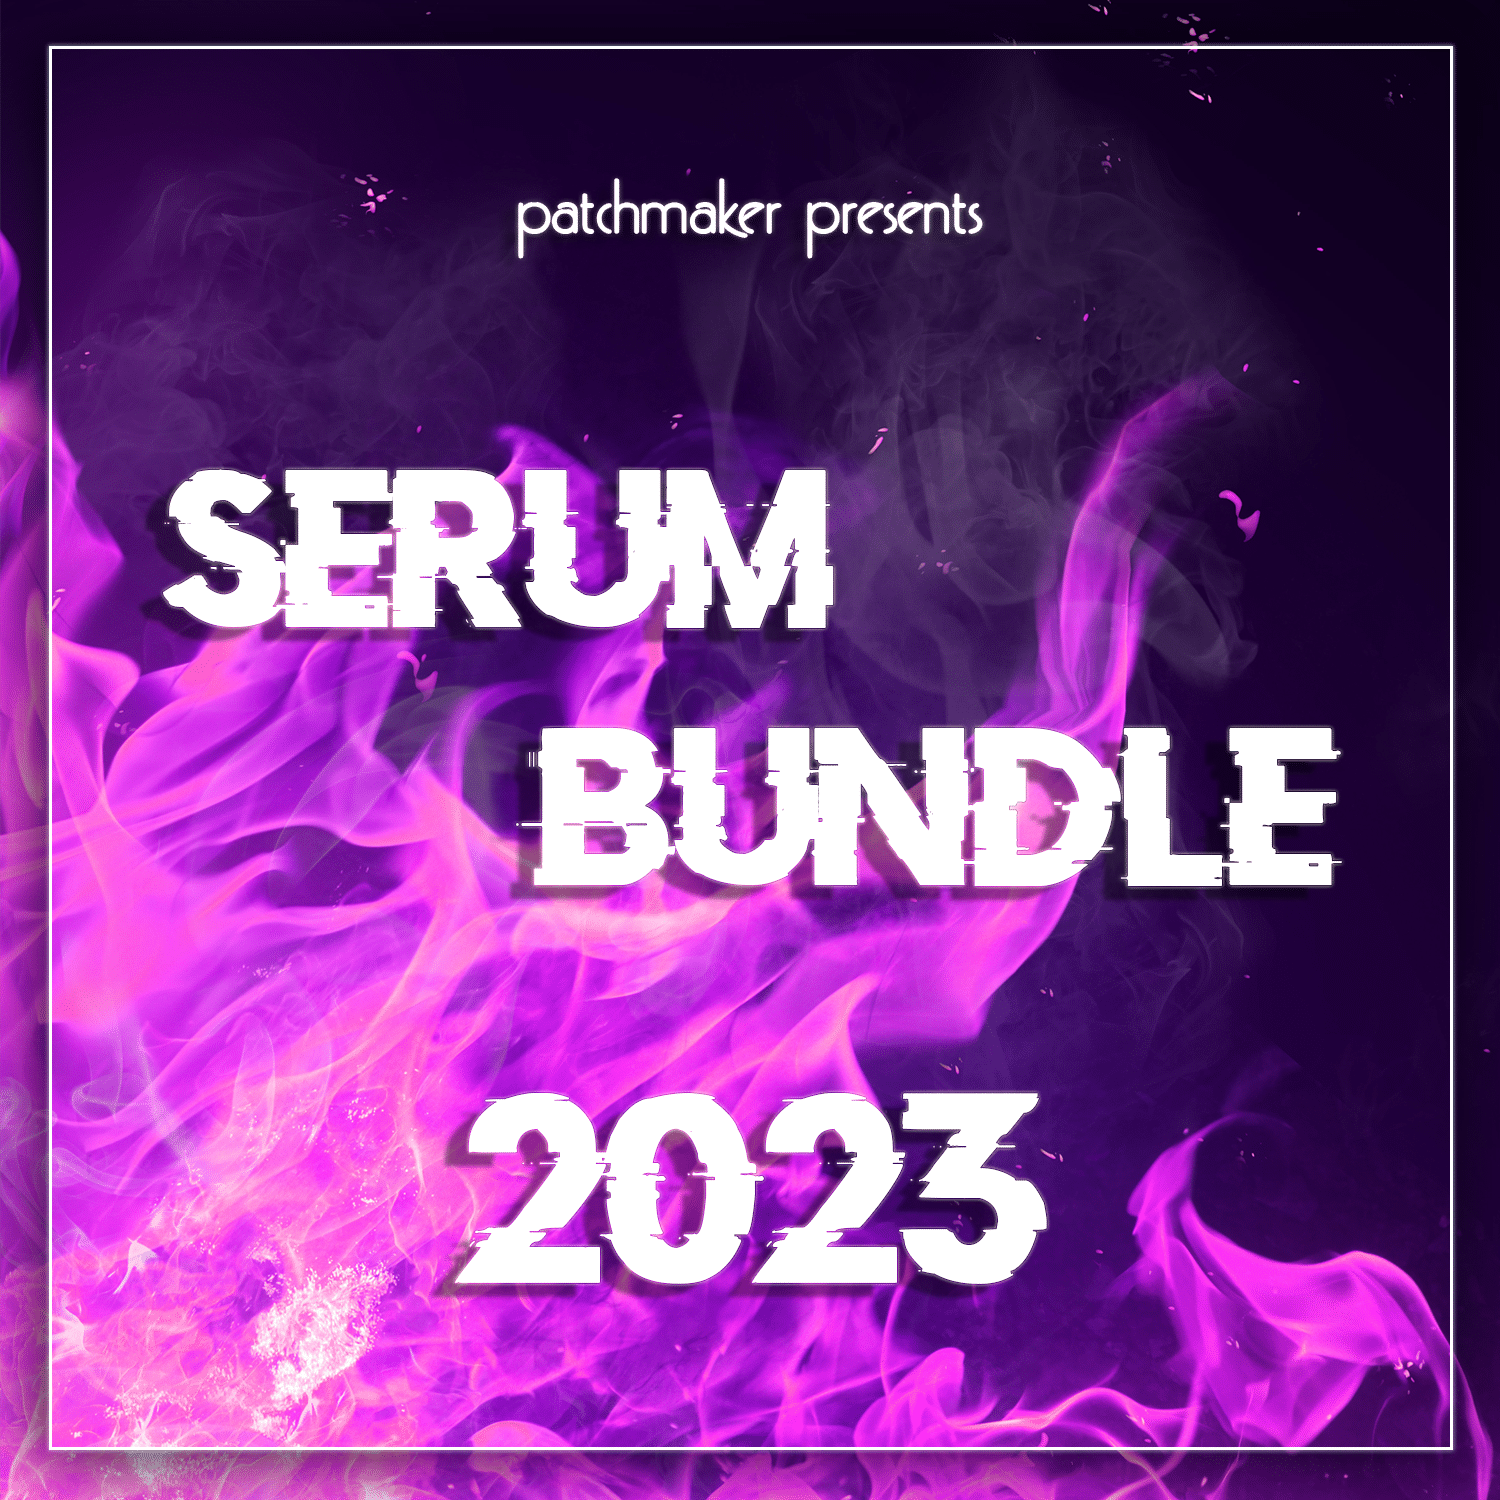 95% off “Serum Bundle 2023” by Patchmaker